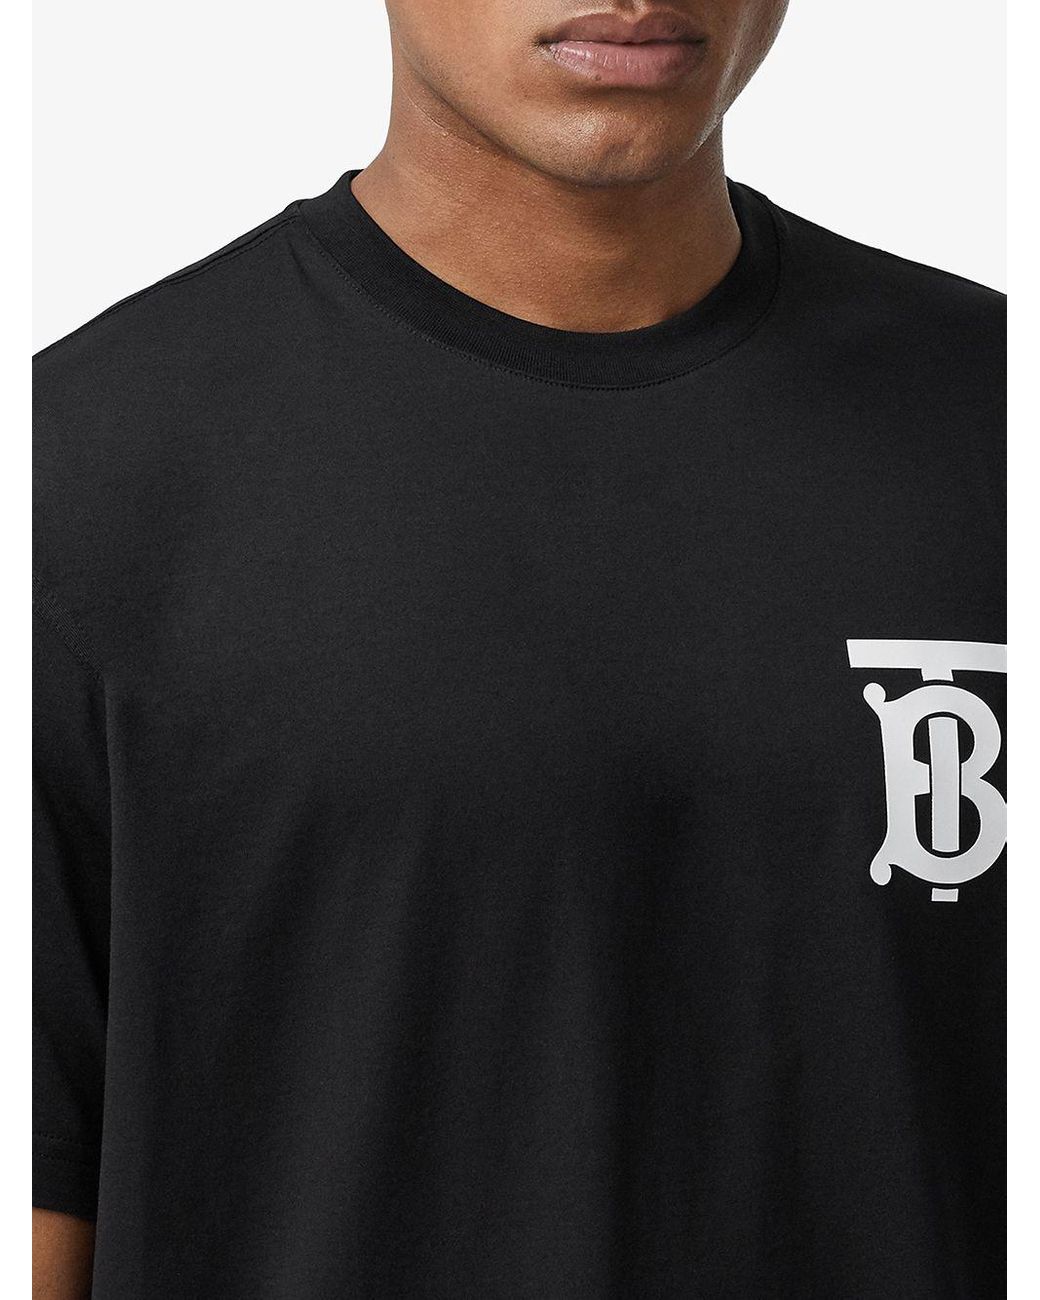 Burberry Oversized Motif T-shirt in Black for Men - Save 45% - Lyst